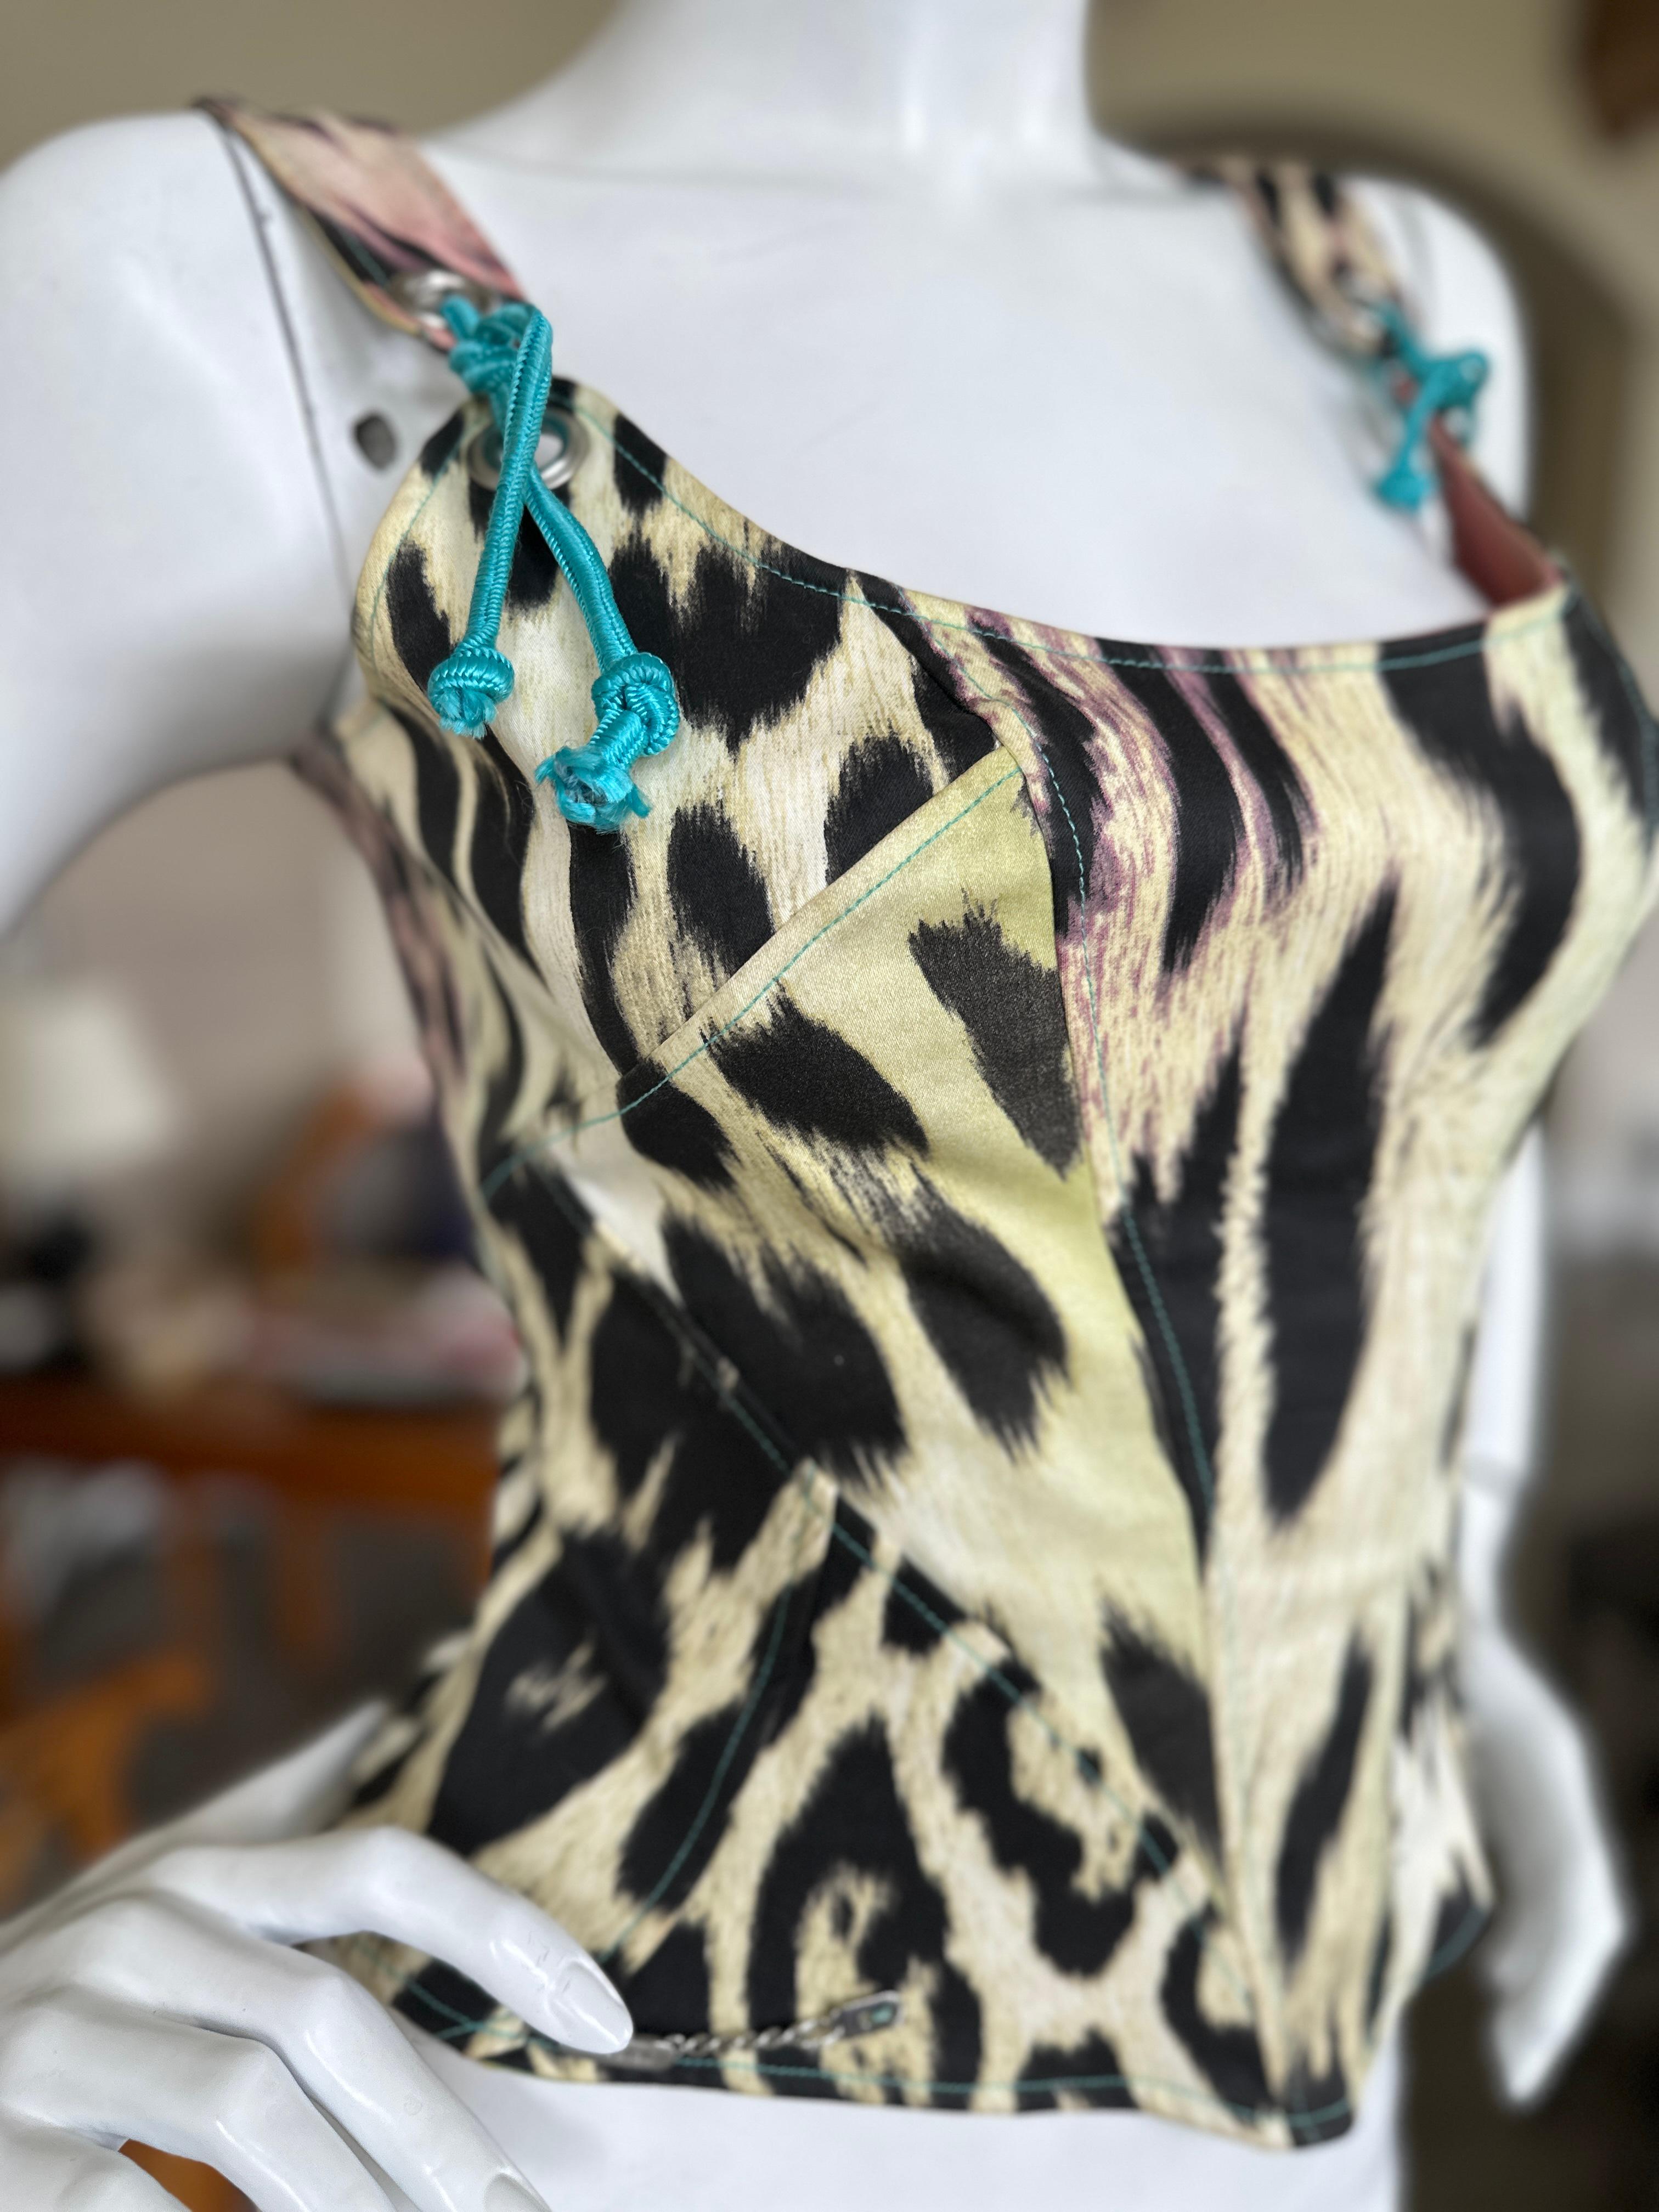 Roberto Cavalli for Just Cavalli Zebra Print Corset with Lace Up Details  For Sale 2